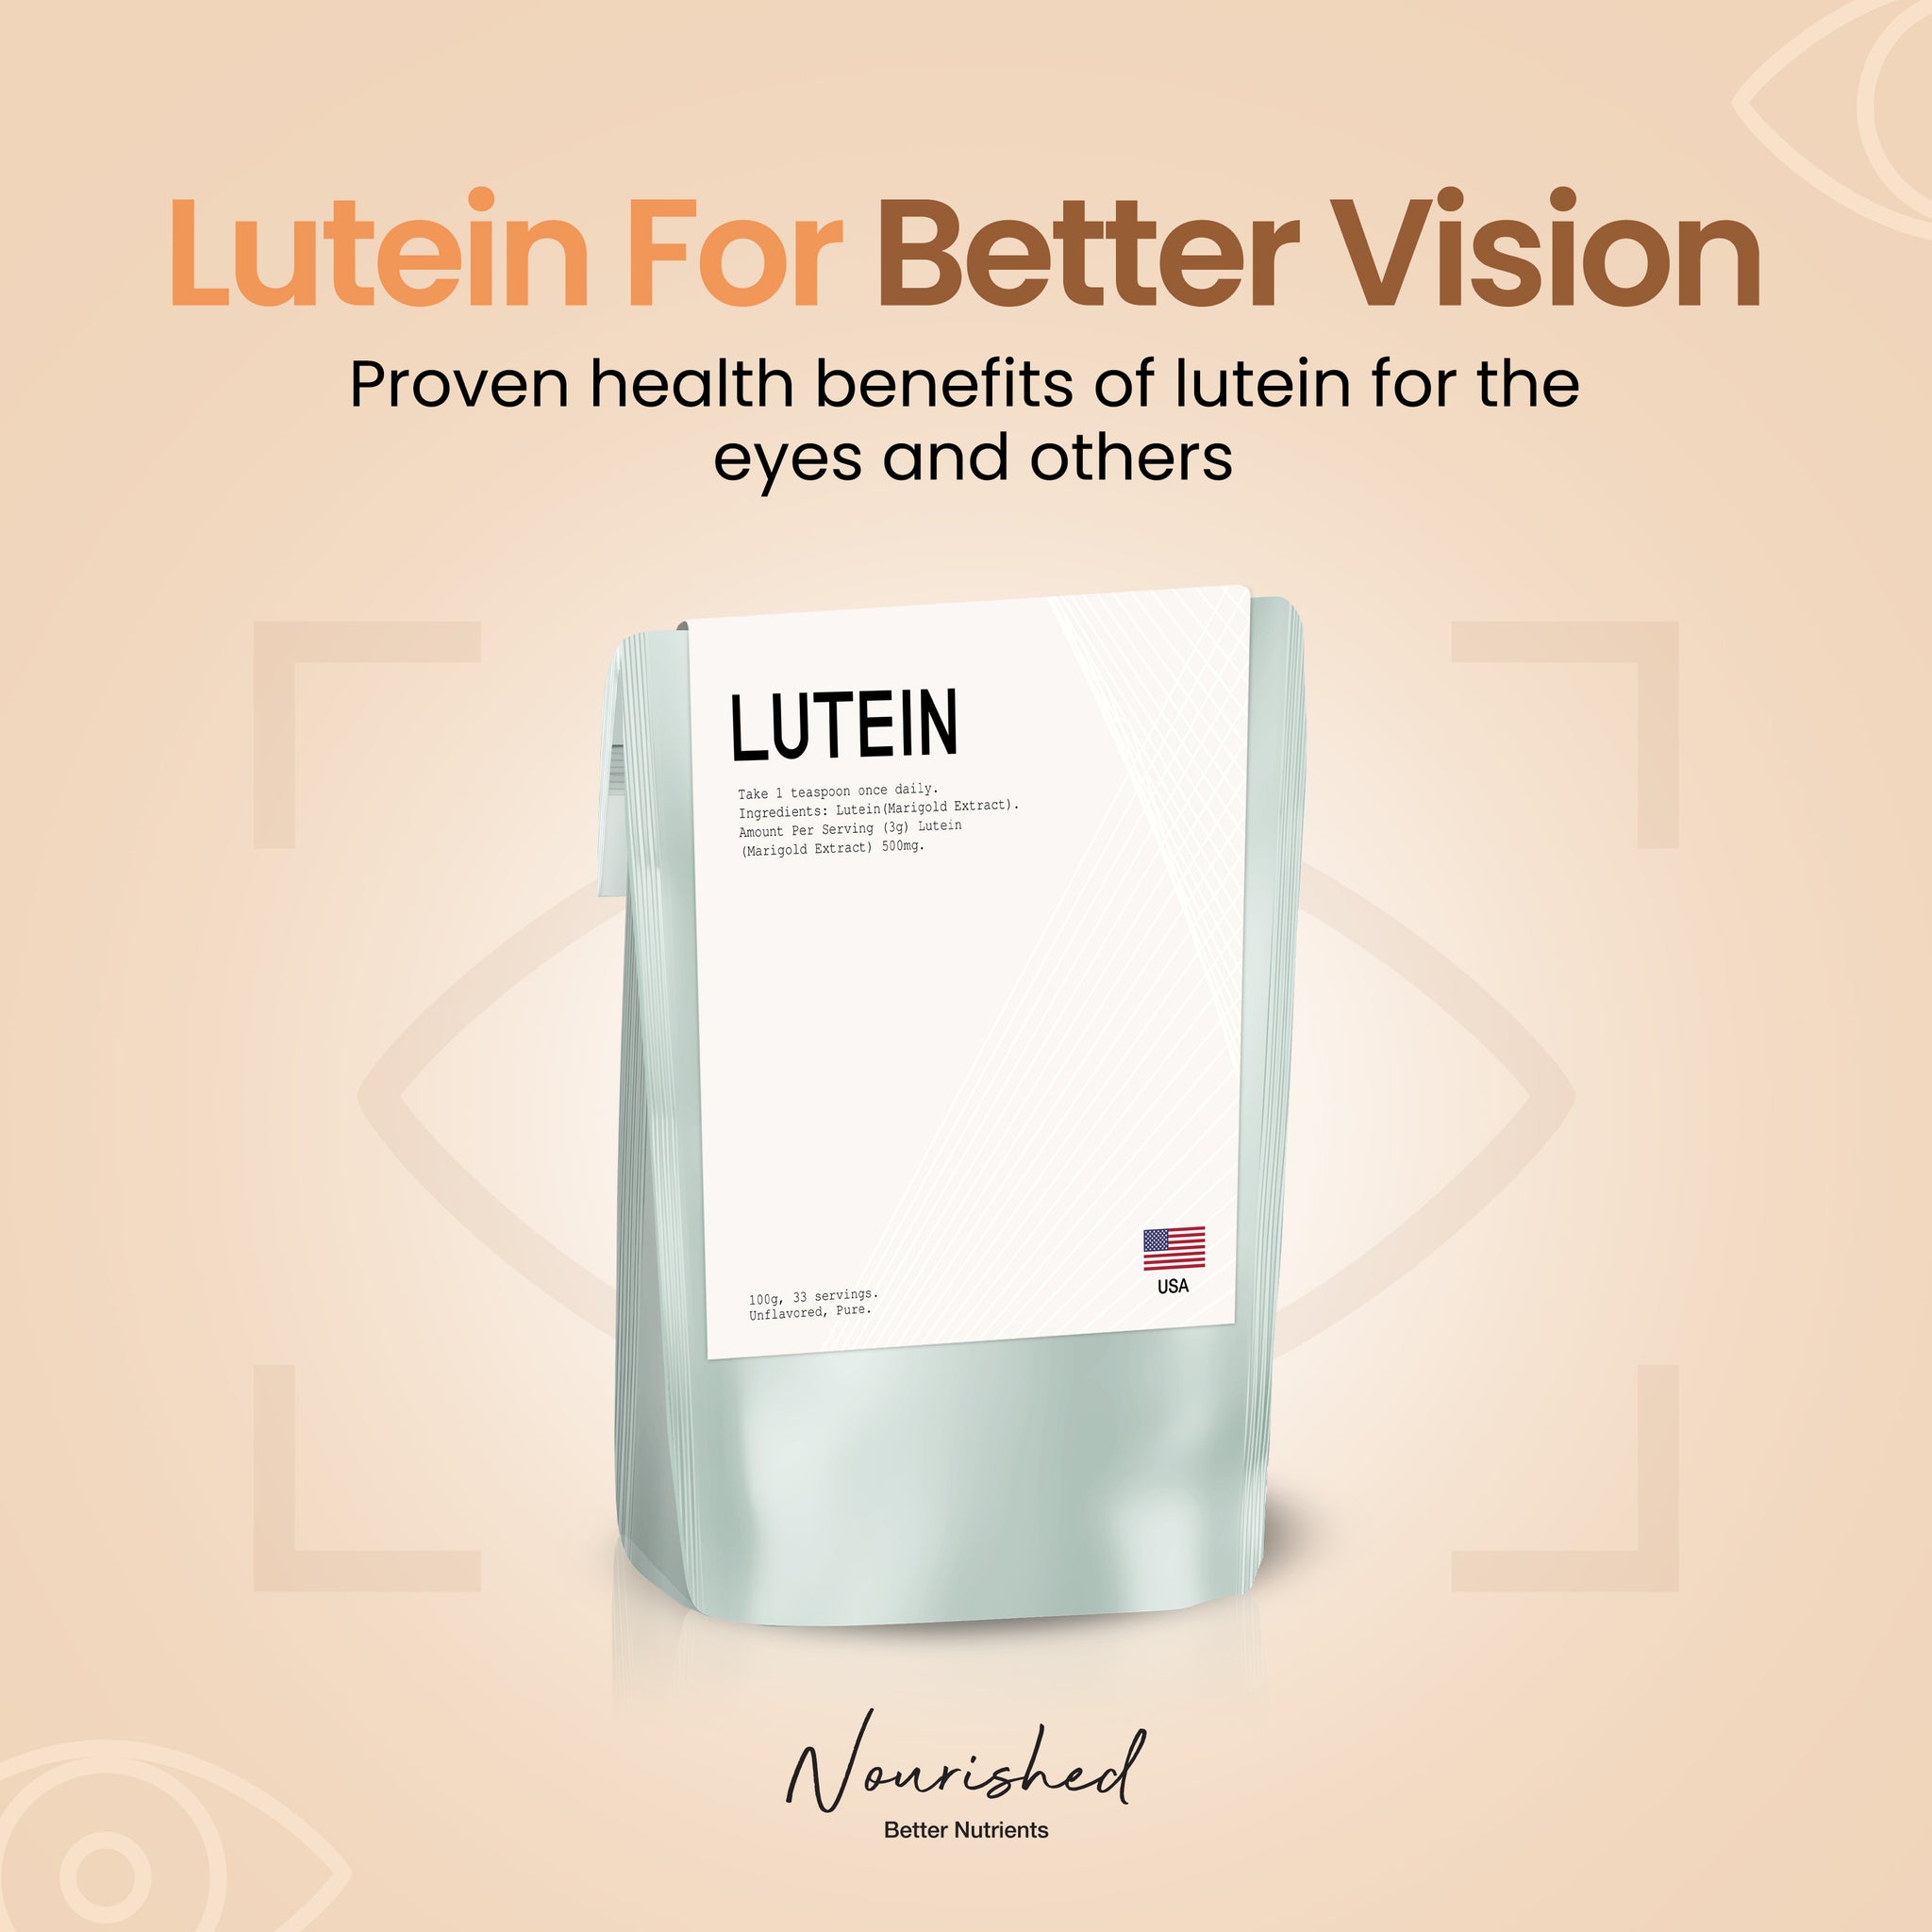 Taking Lutein To Protect Your Eyes Against Blue Light Emitted From Digital Devices? It Has More To Offer